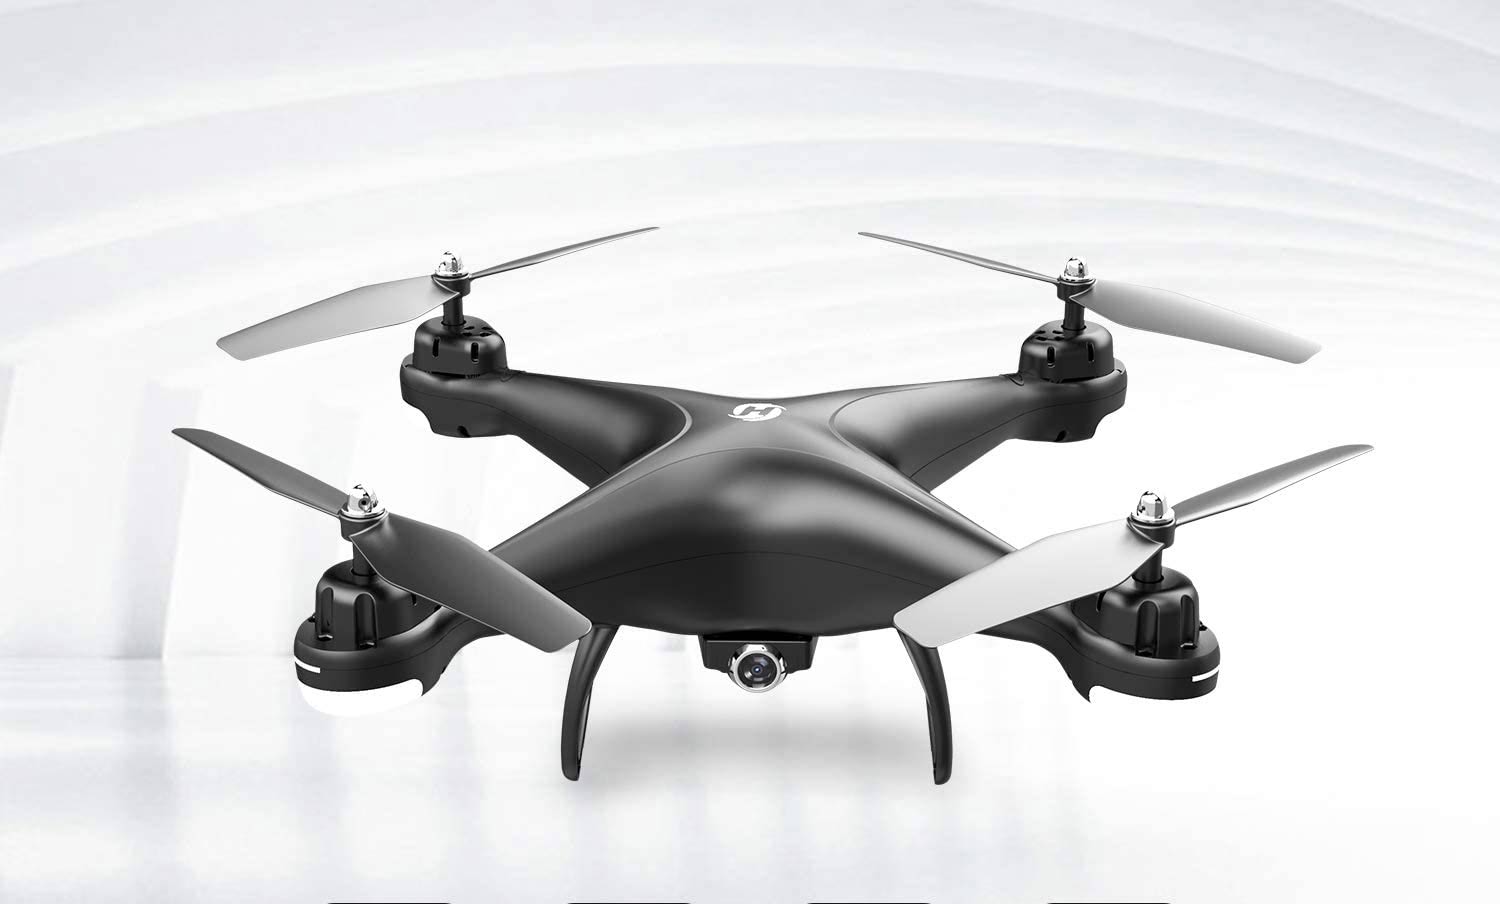 Amazon’s simplest digicam drone below $100 has a further reduce value on the present time